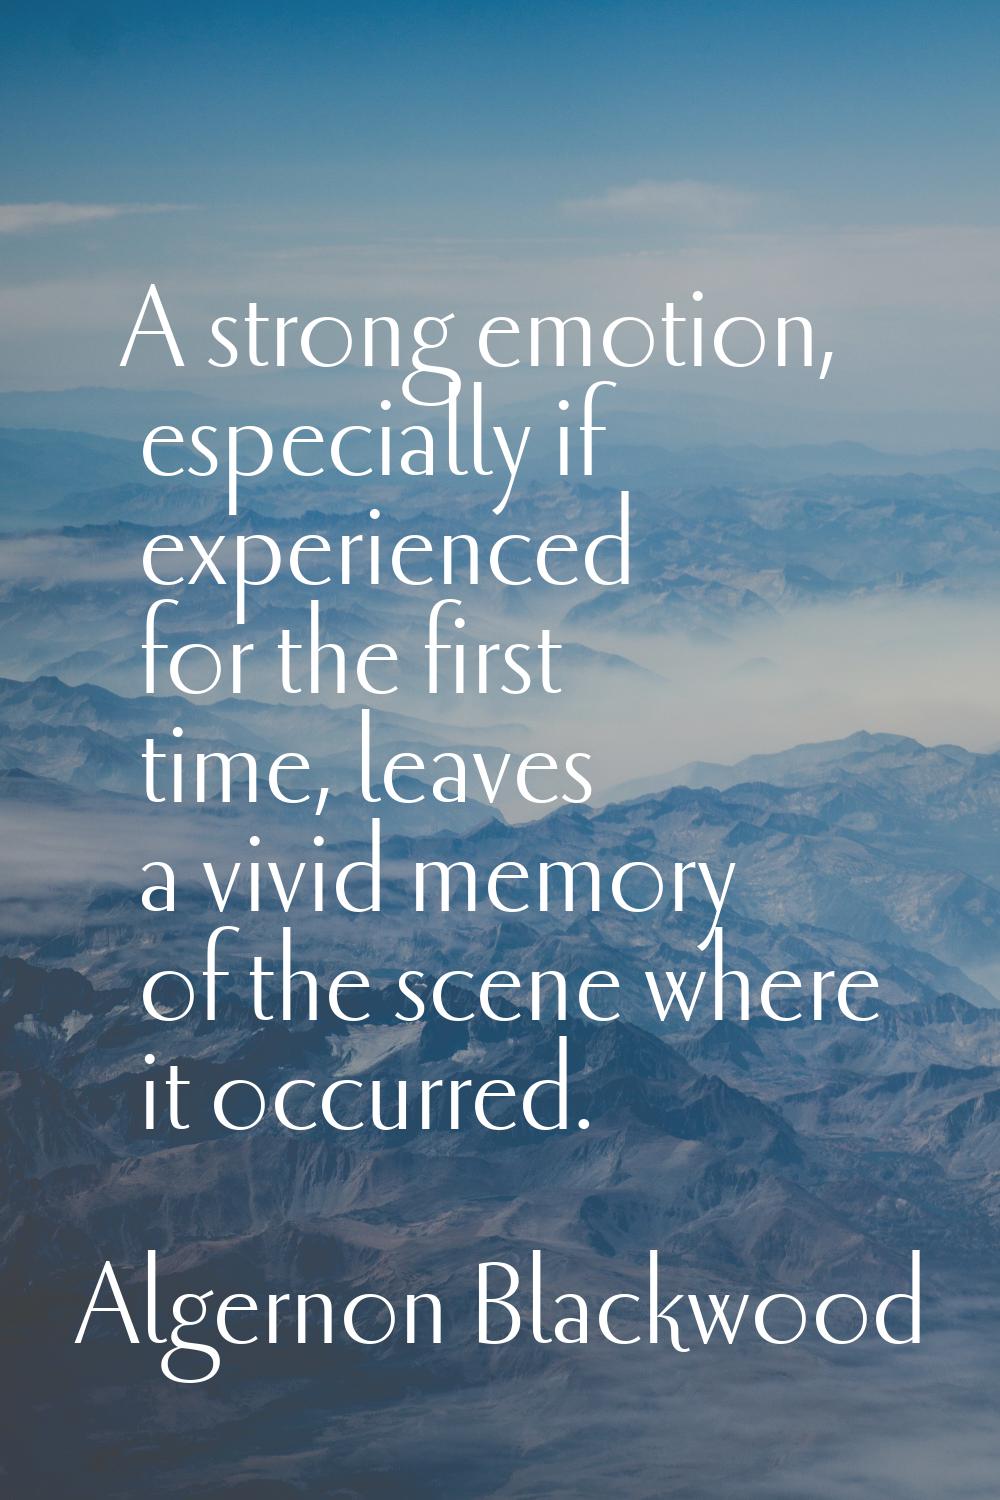 A strong emotion, especially if experienced for the first time, leaves a vivid memory of the scene 